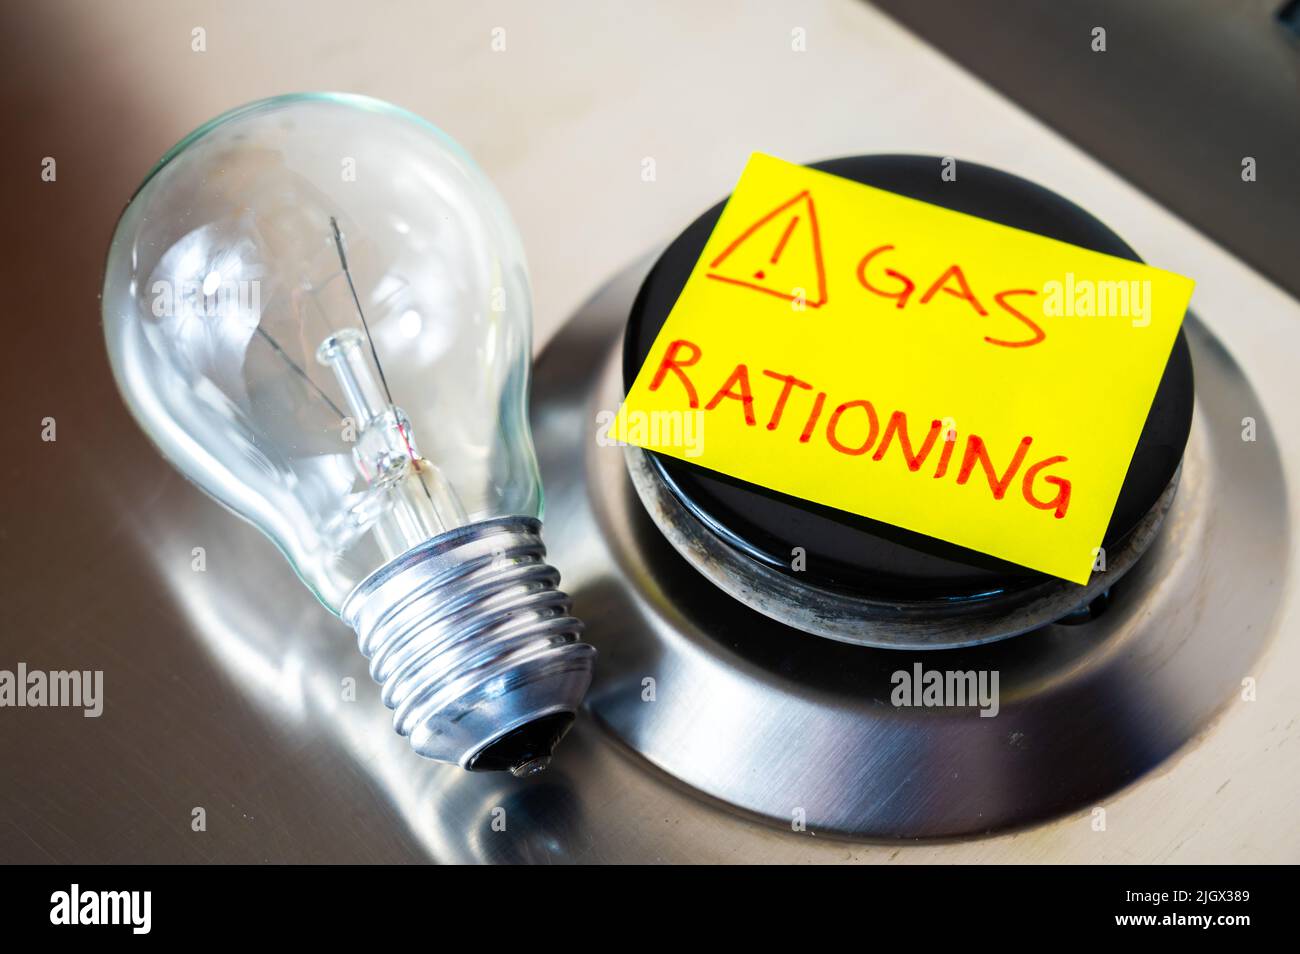 Gas stove, with yellow note next to it with text "gas rationing" and light bulb off. Rationing and insufficiency in gas flows. Energy crisis. Stock Photo